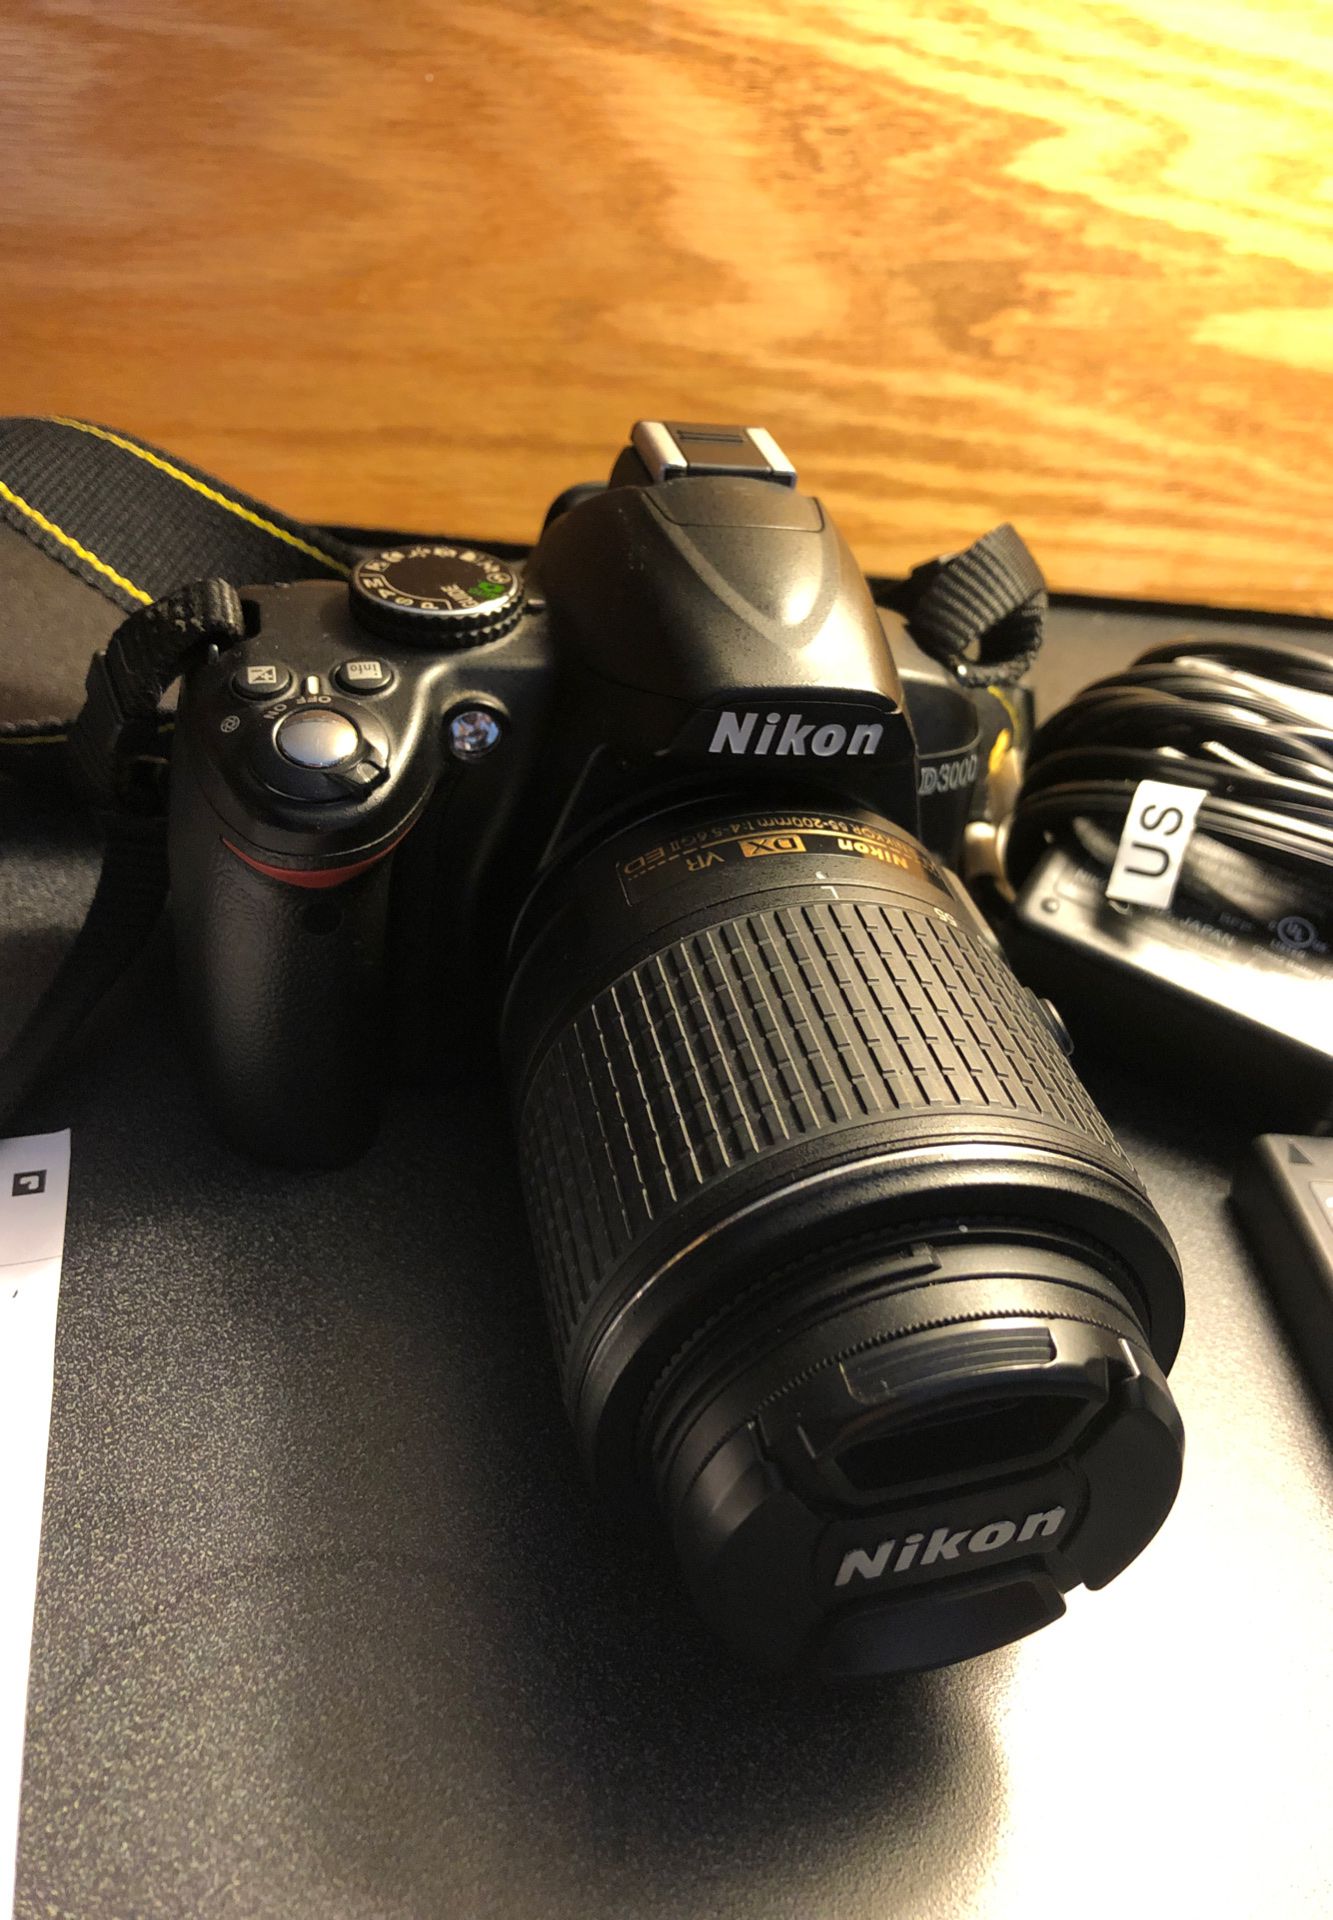 Nikon D3000 with 55-200mm lens, 2 sd cards, charger, lens hood, 3 batteries